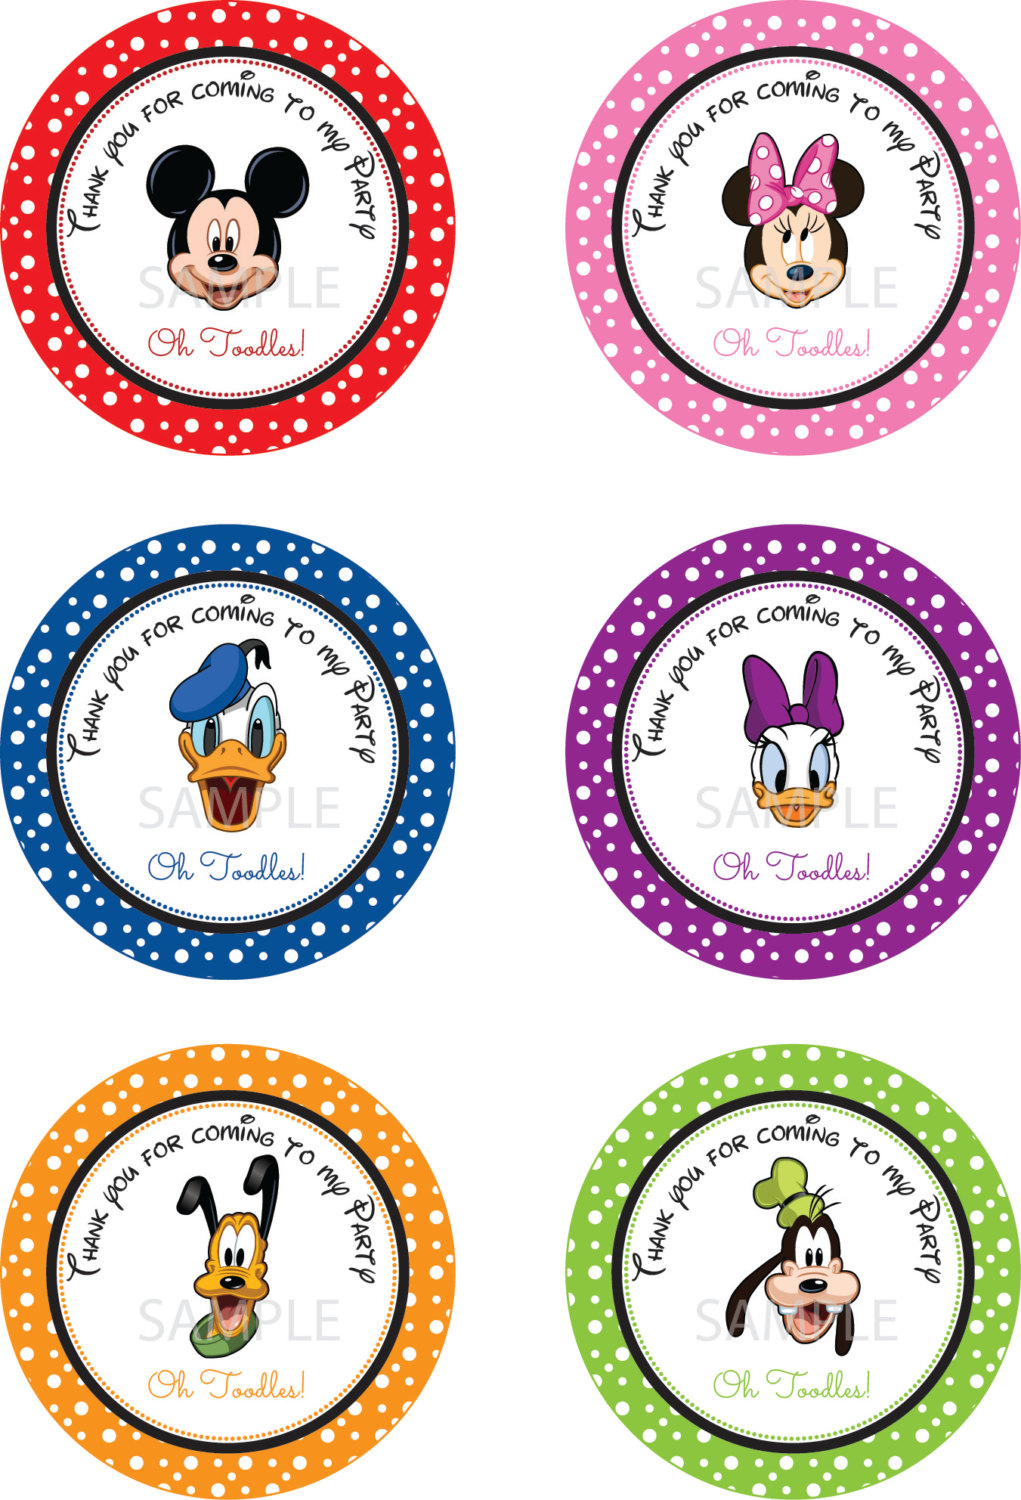 mickey-mouse-clubhouse-characters-free-download-on-clipartmag